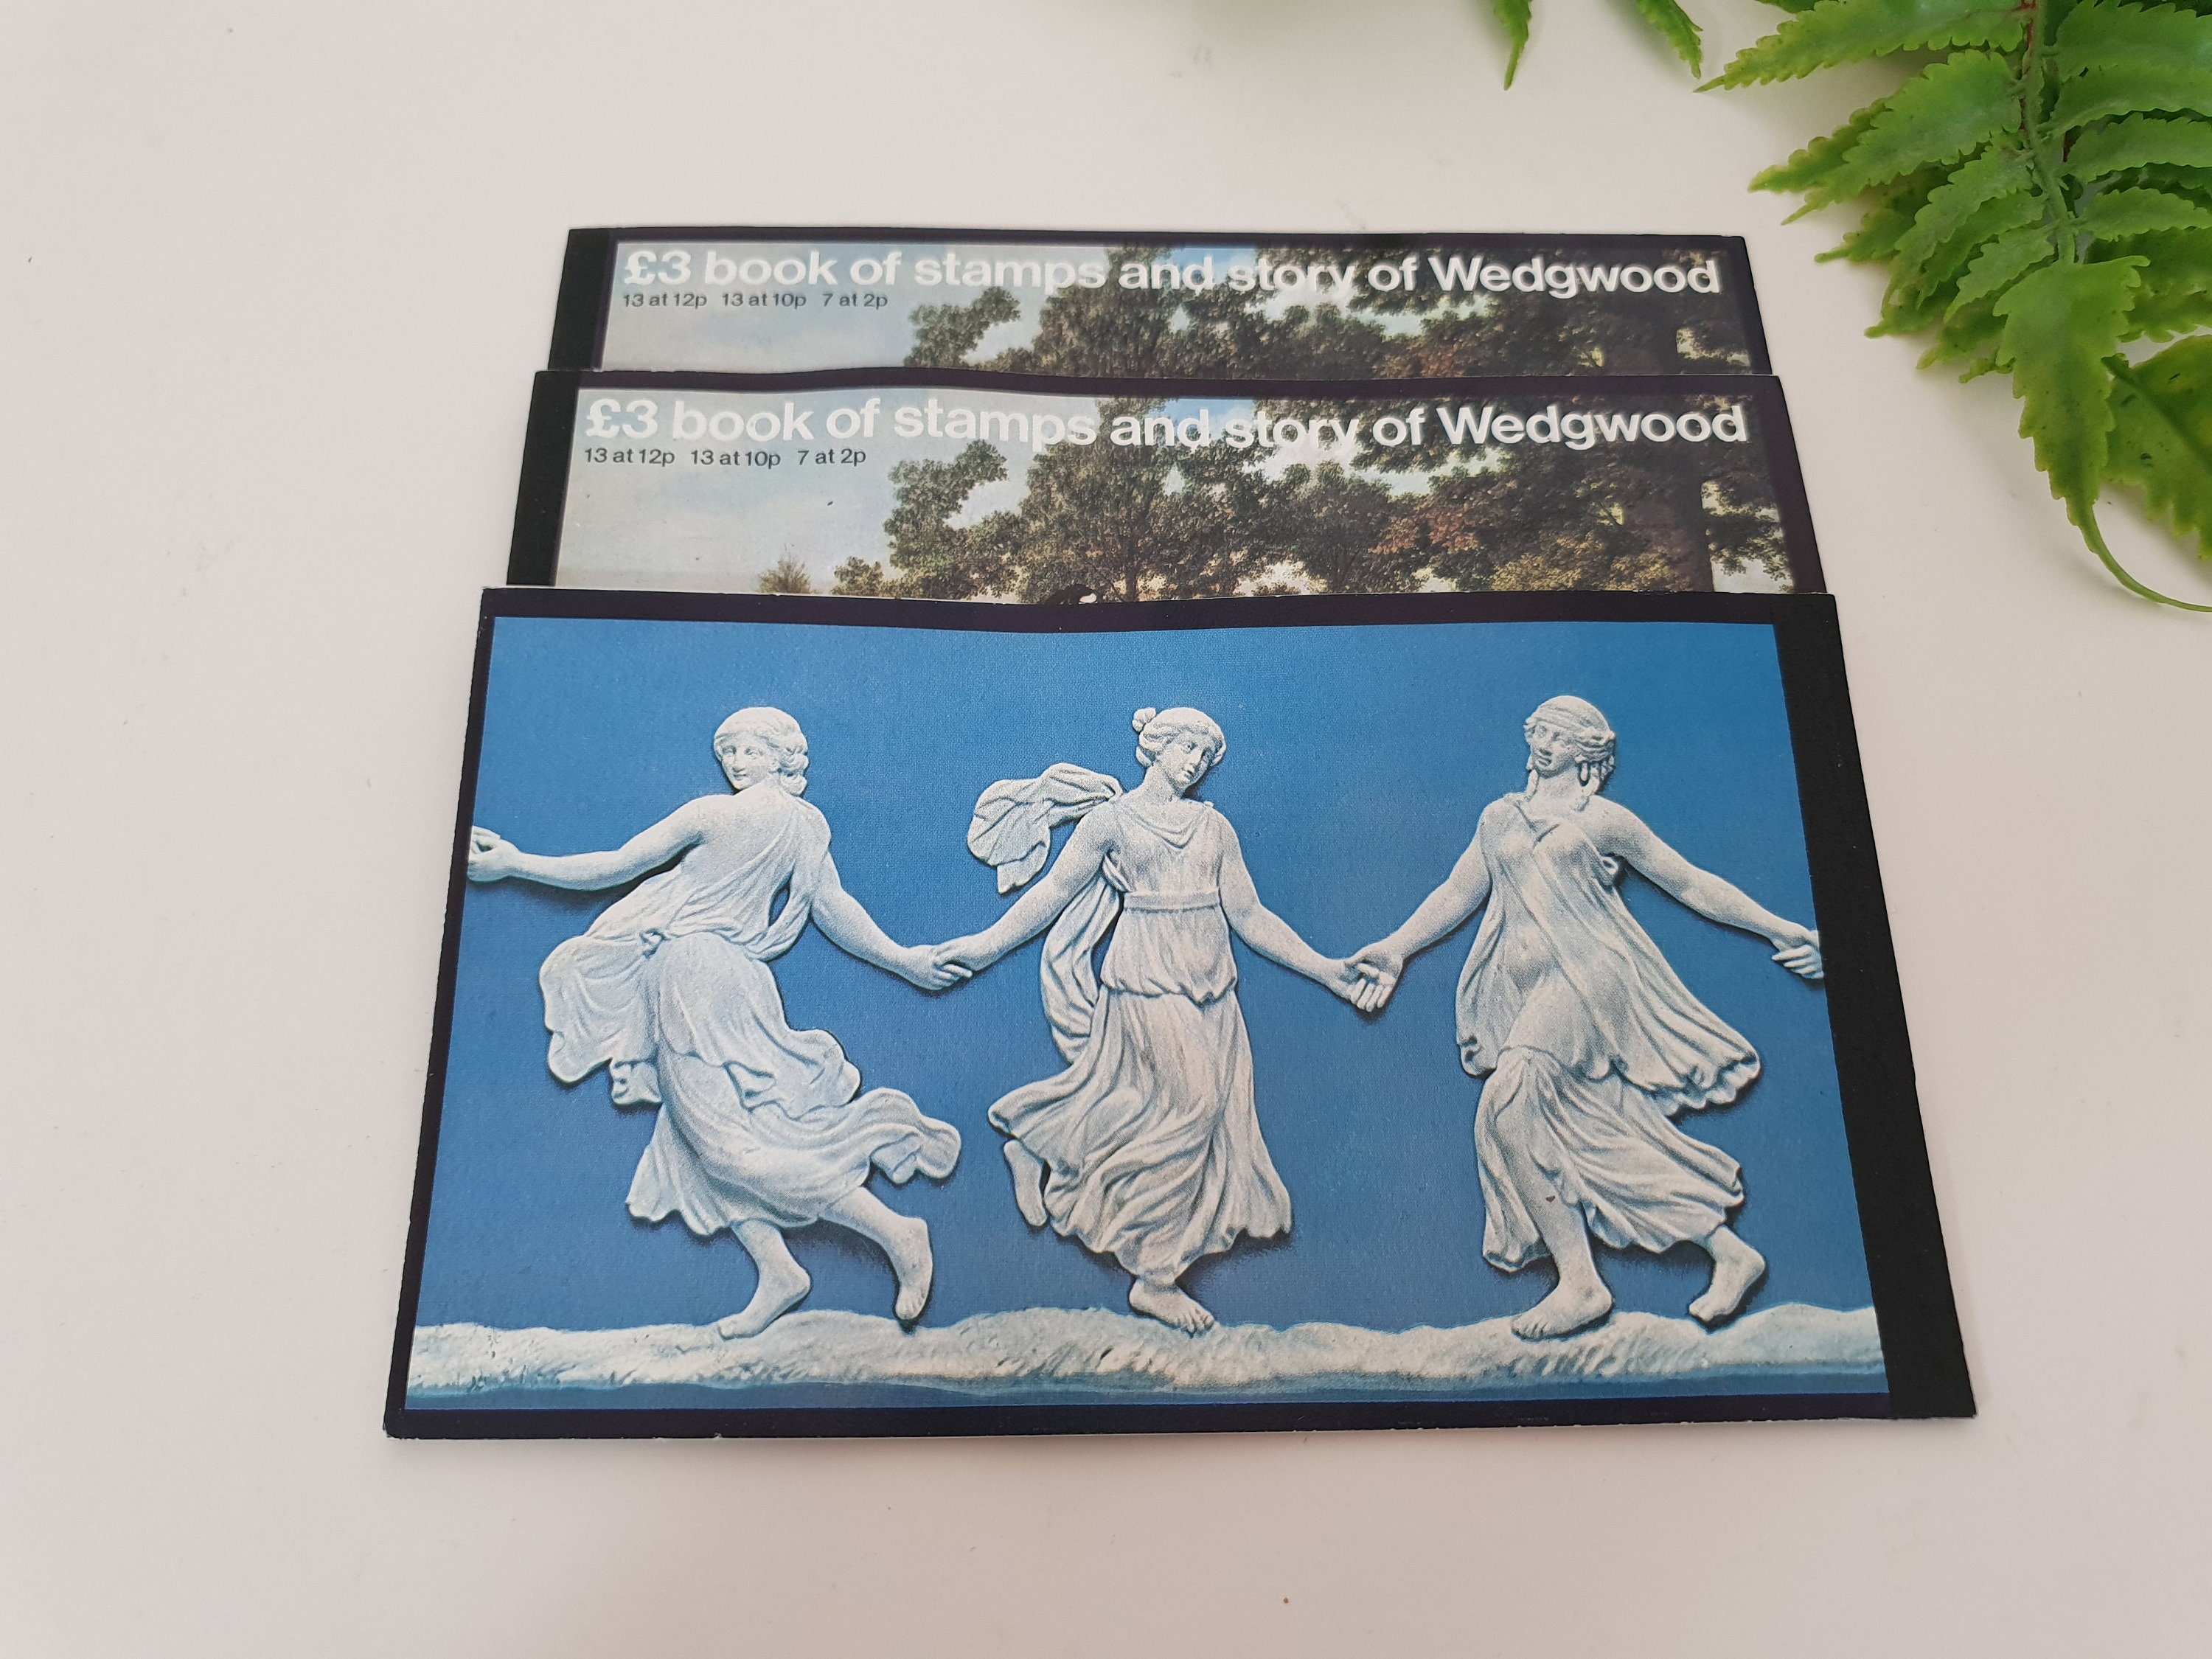 THE STORY OF WEDGWOOD, £1 BOOK OF STAMPS